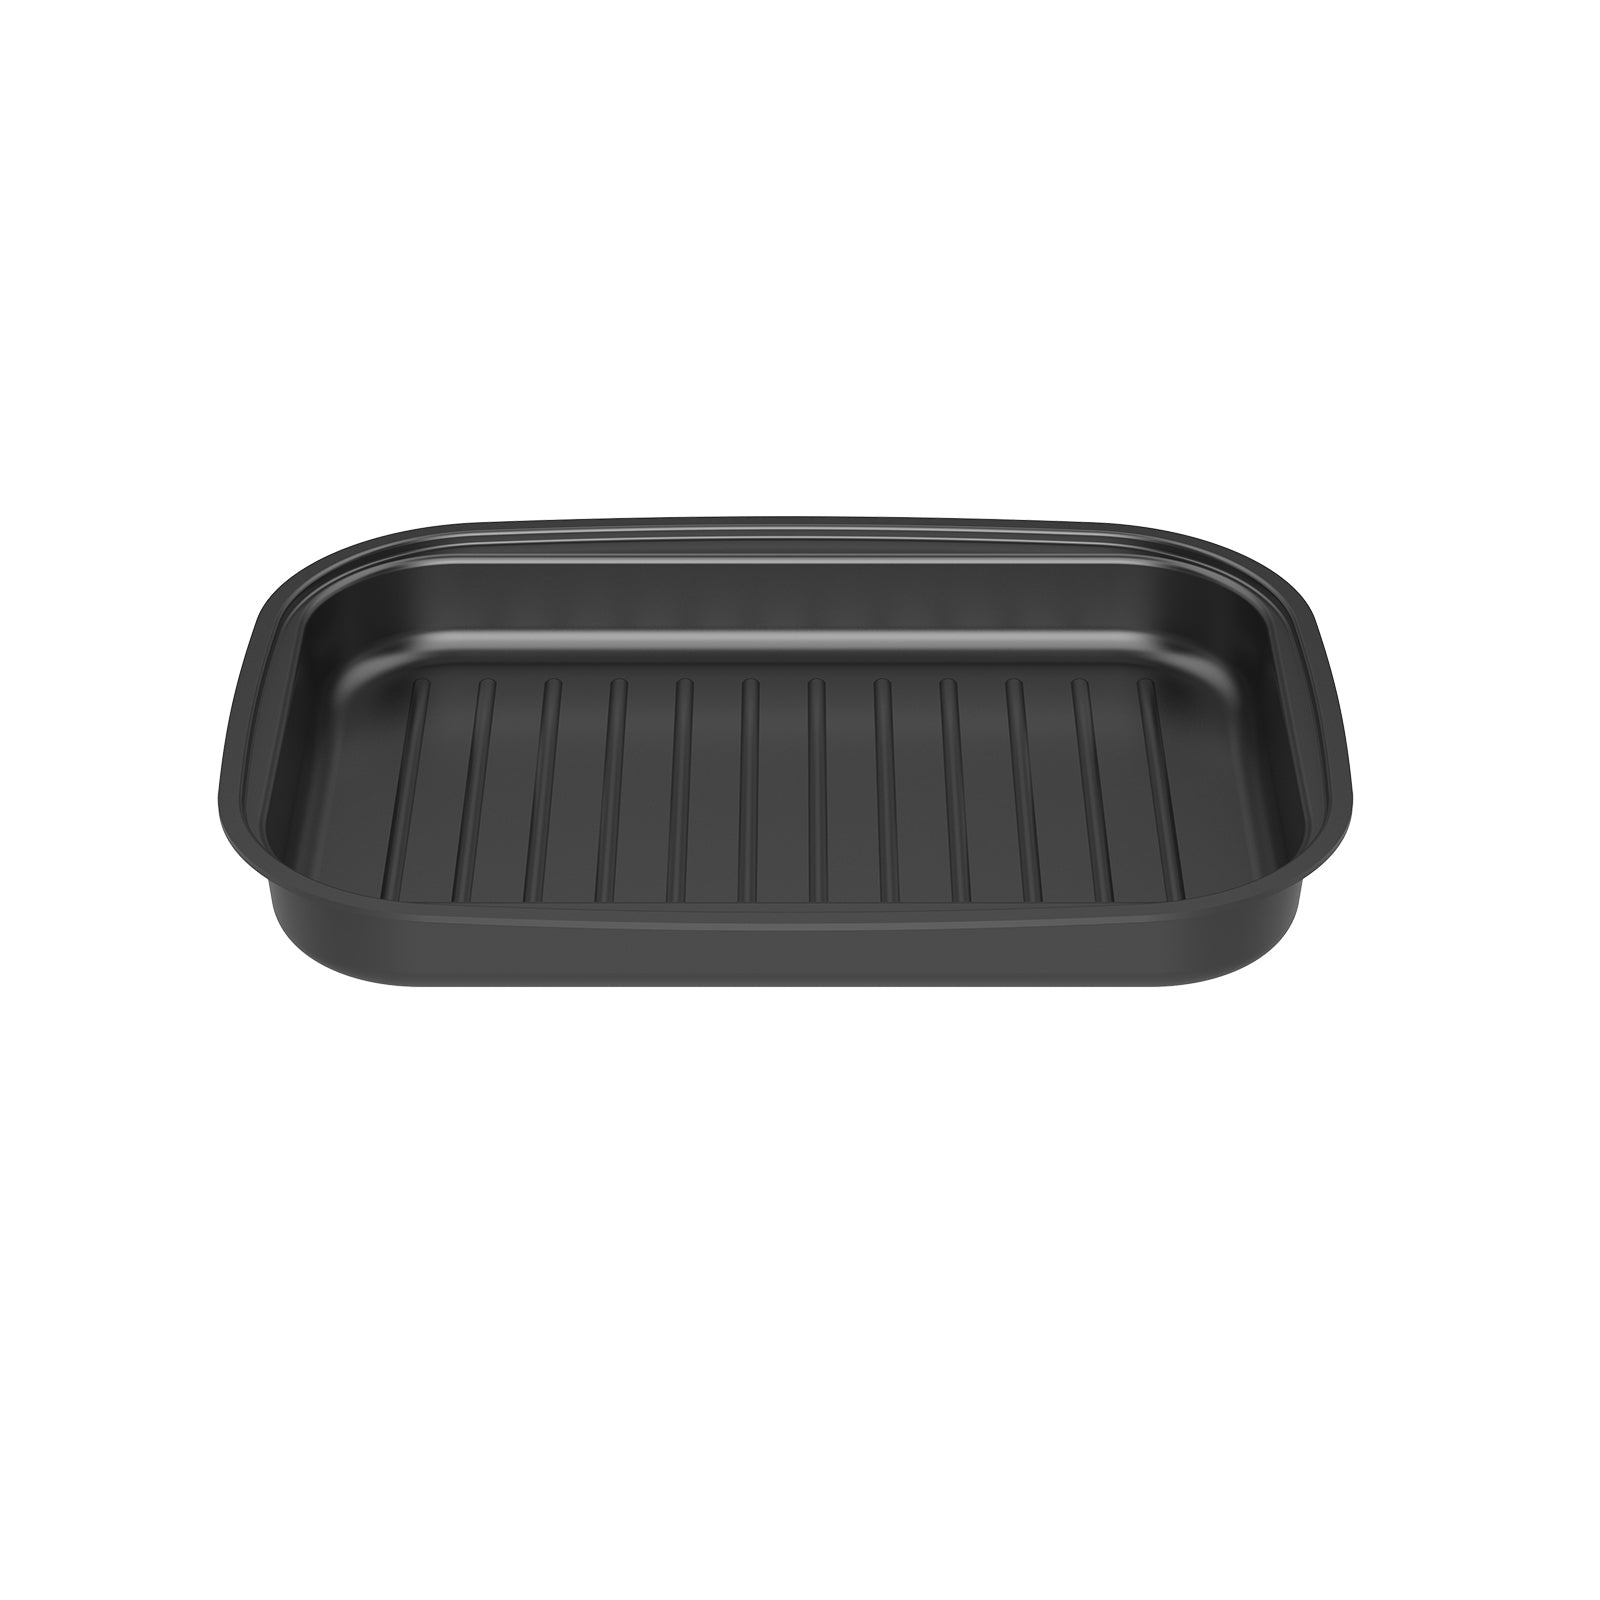 Essential ELG-30 Every Grill Plate